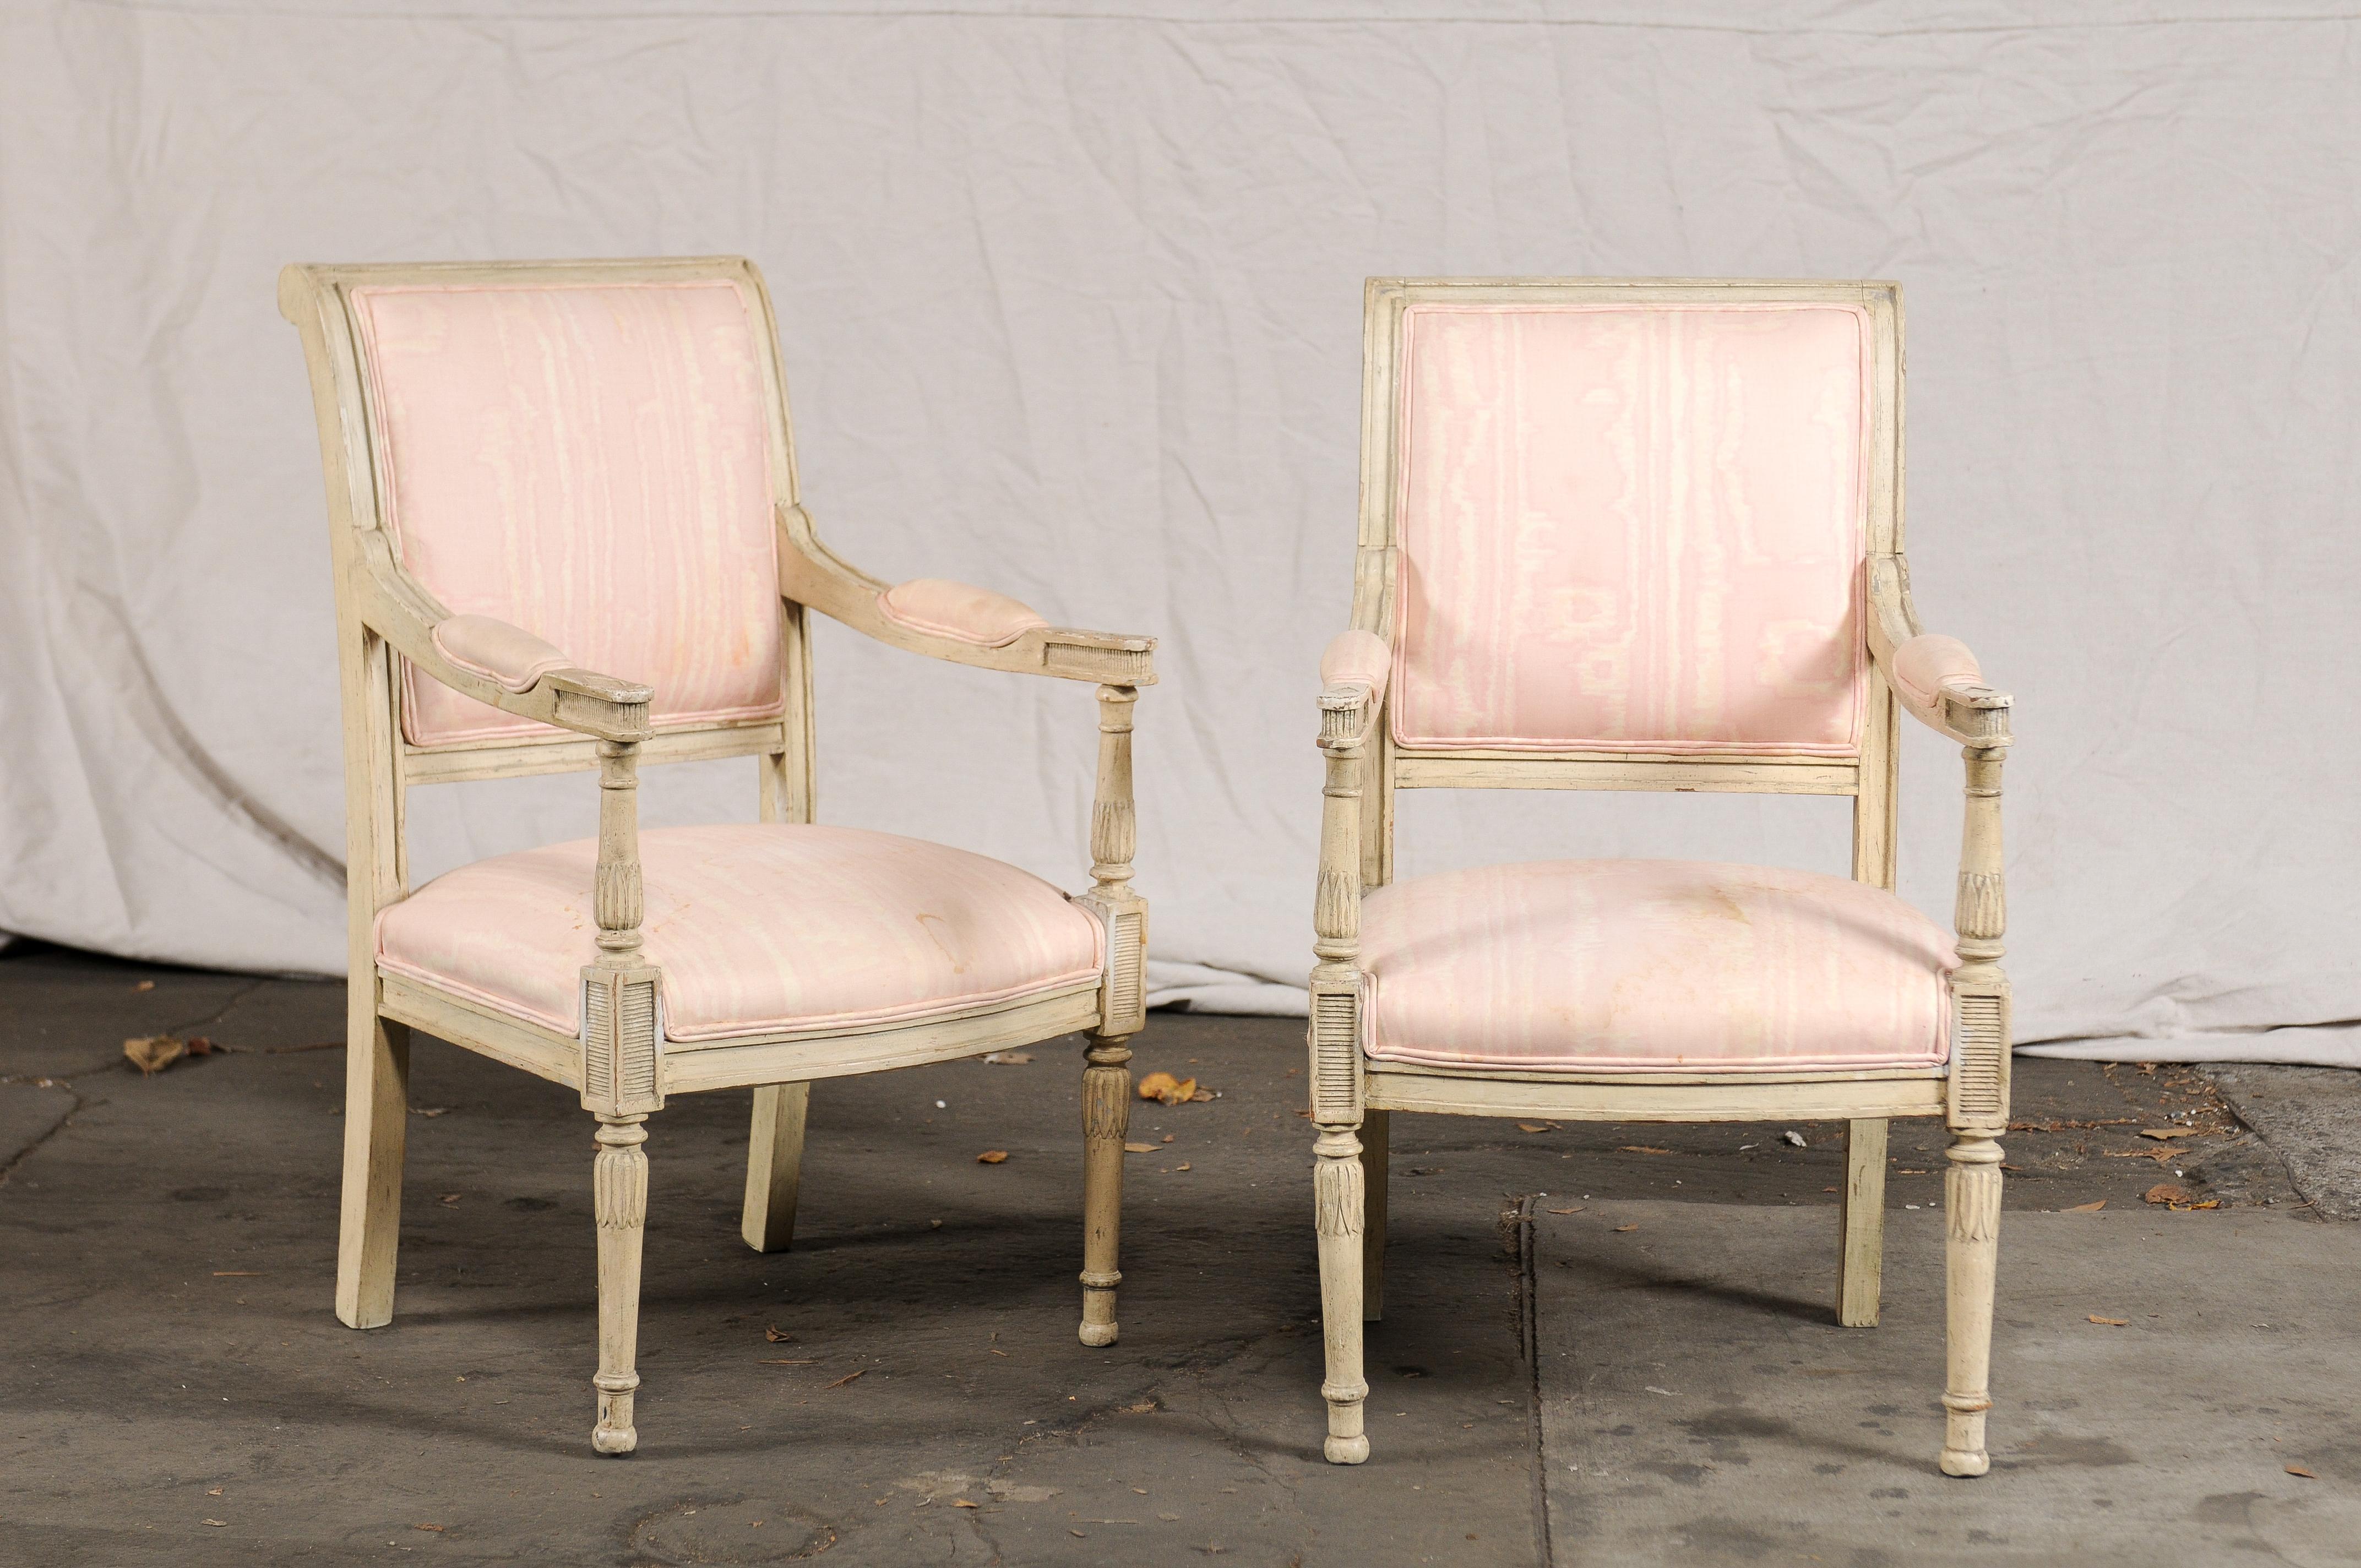 Pair of 19th-early 20th century French child's chairs, painted Directoire style
Measures: 17.75